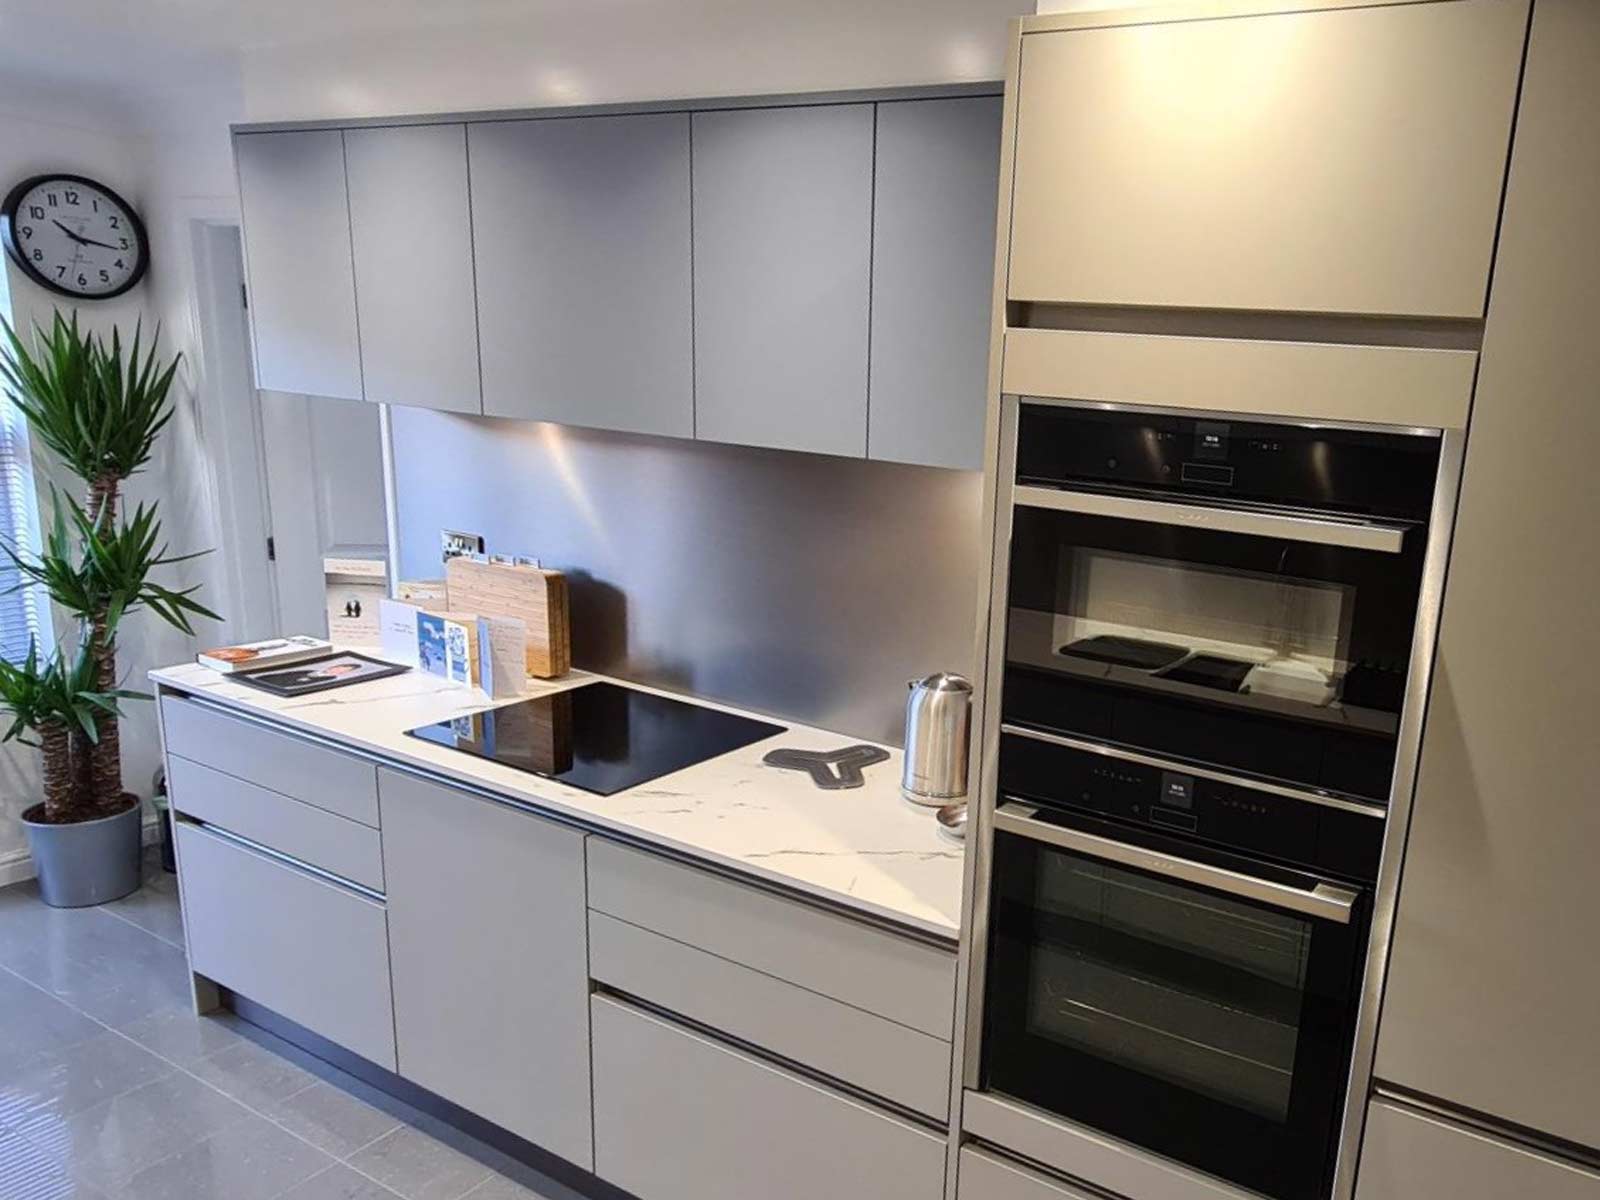 A matt cashmere kitchen with pale grey and powder blue cabinet doors